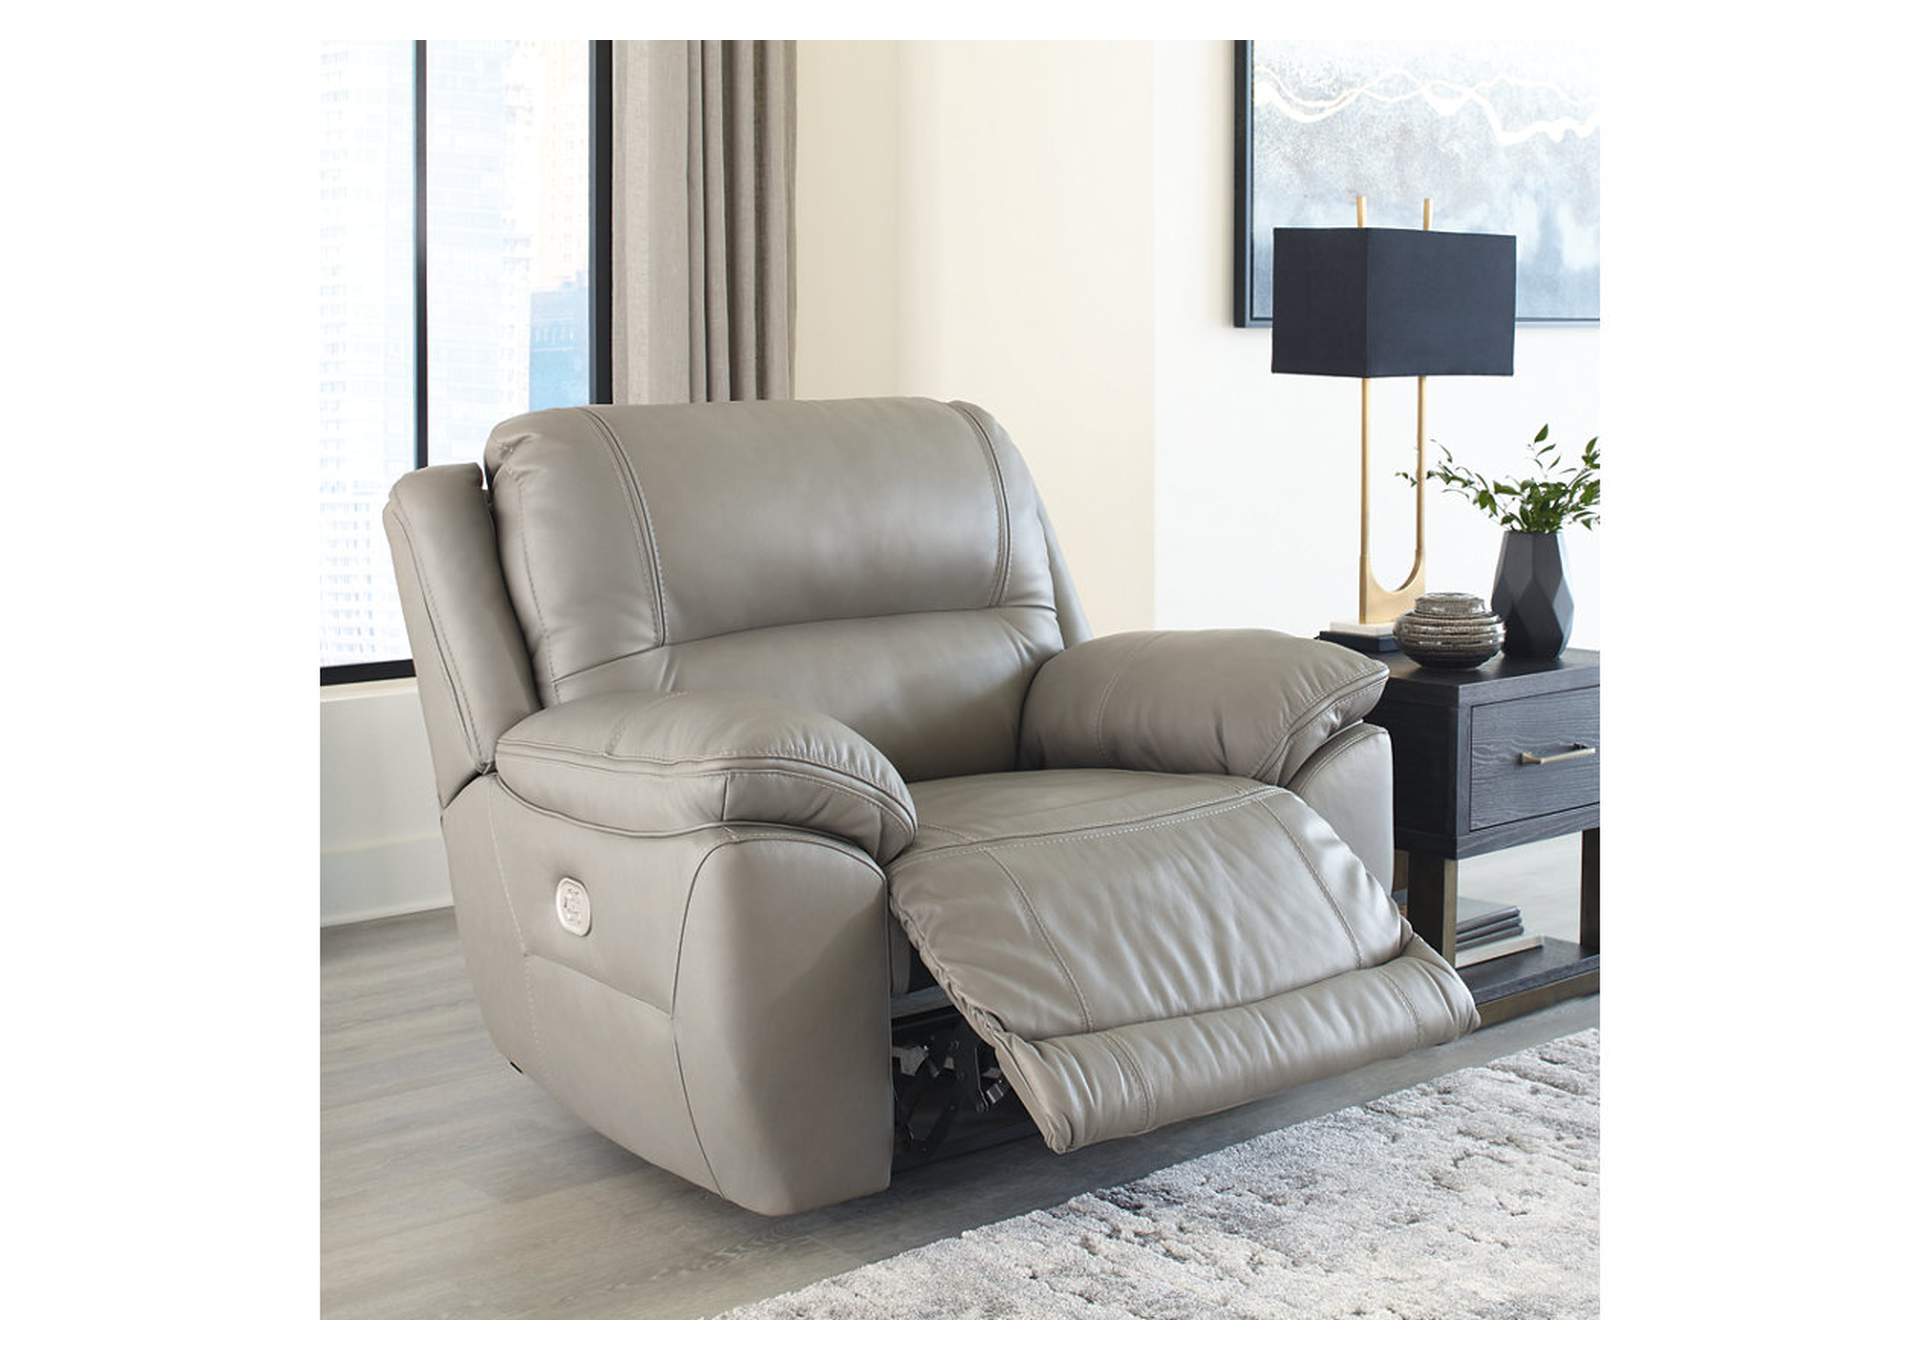 Dunleith Power Recliner,Signature Design By Ashley